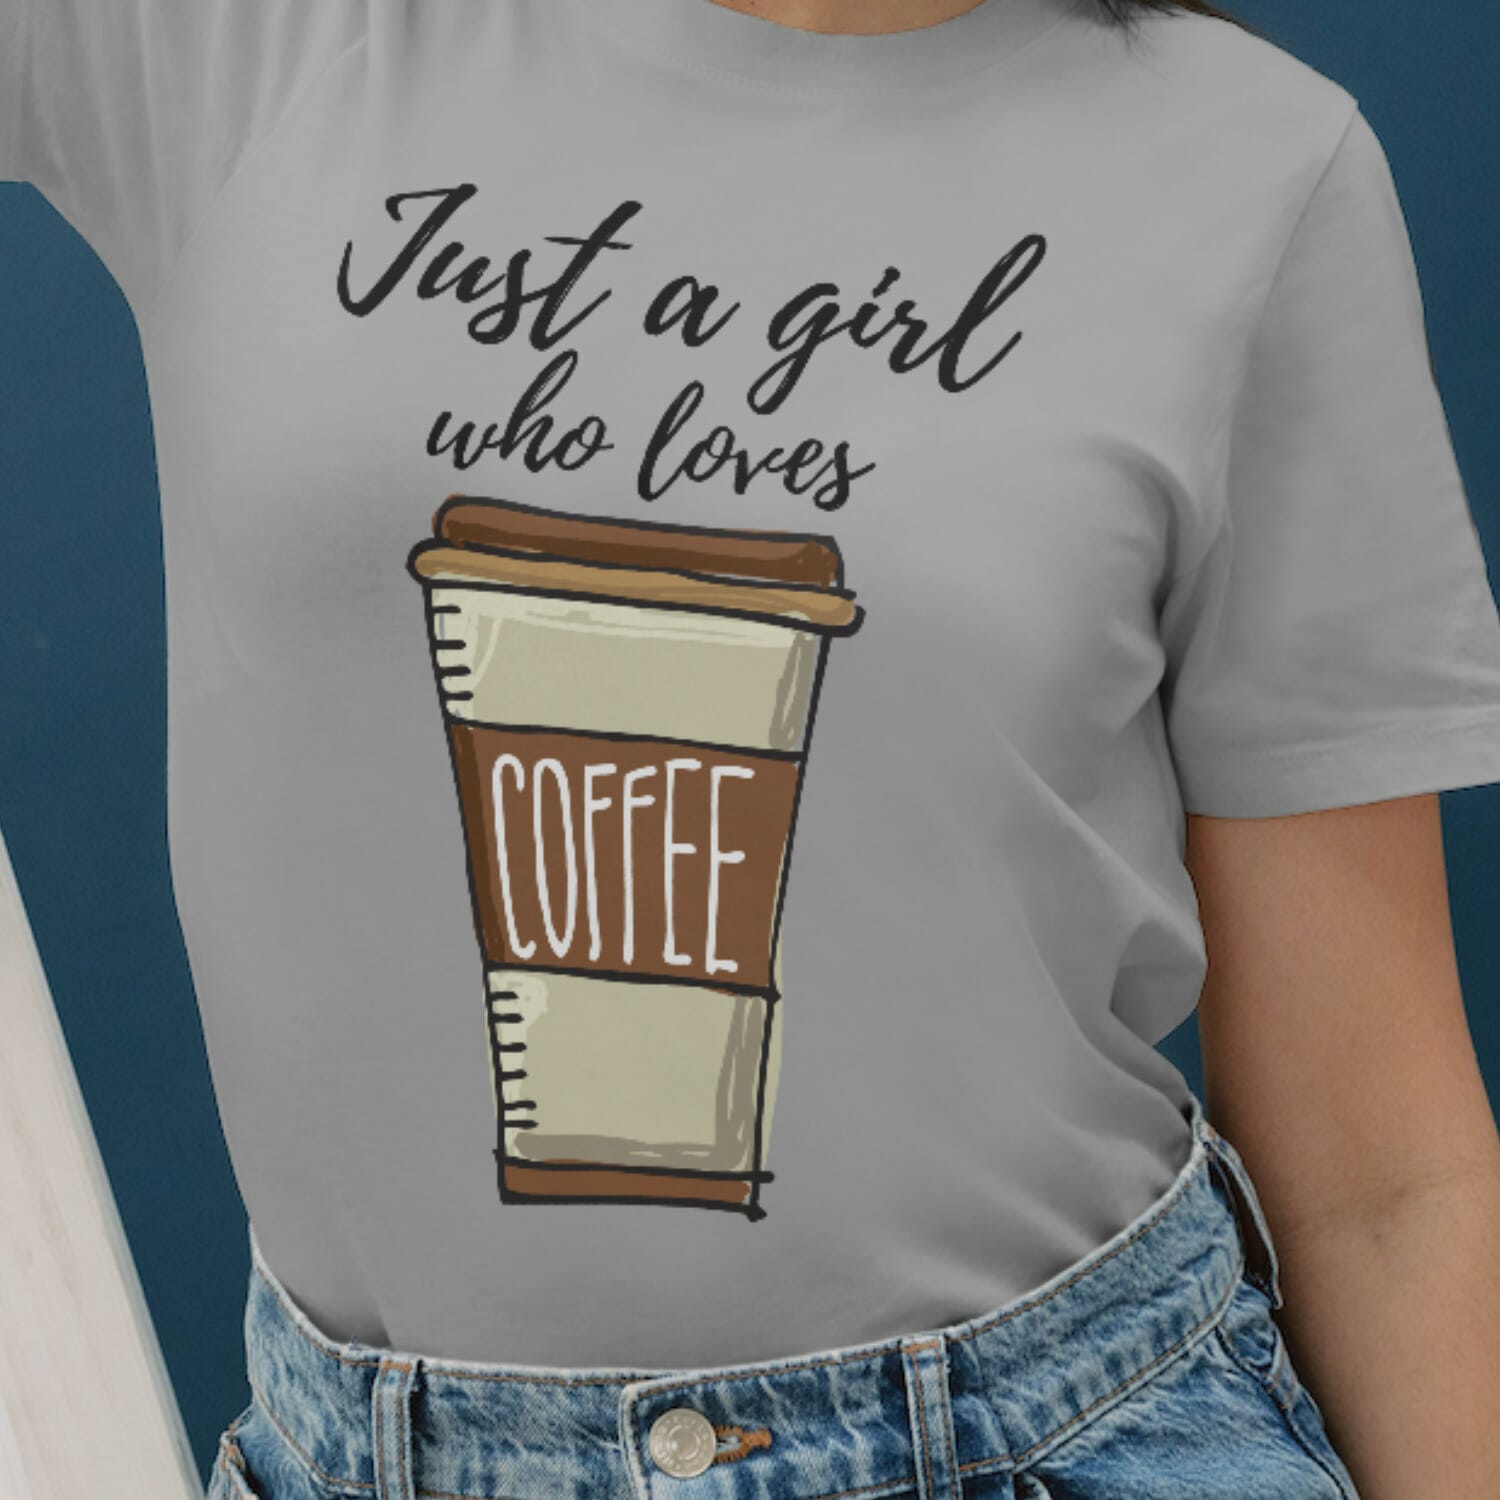 Just a girl who loves coffee Tshirt design